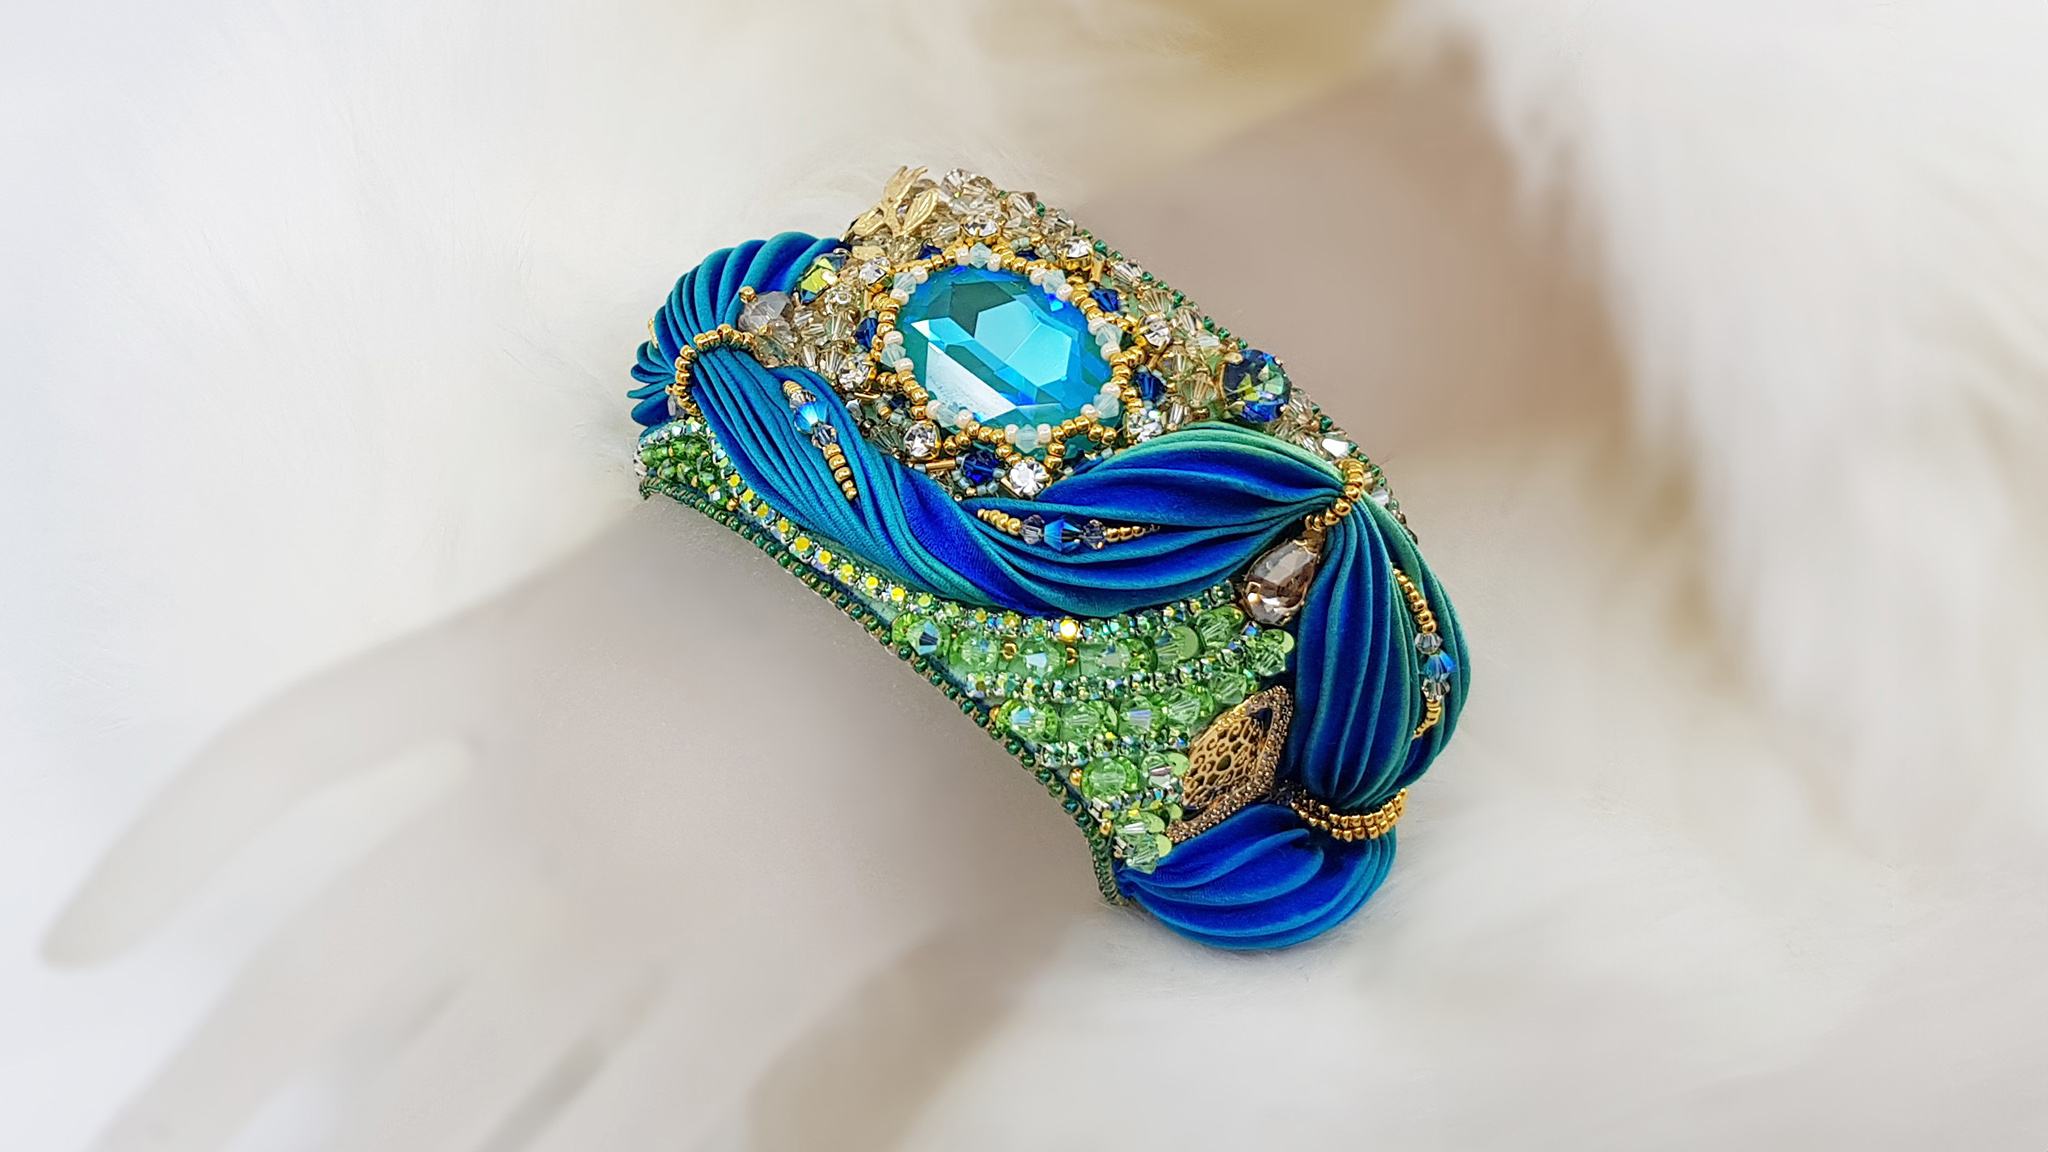 Kathy Bracelet, color blue and green made in bead embroidery by Monica Vinci